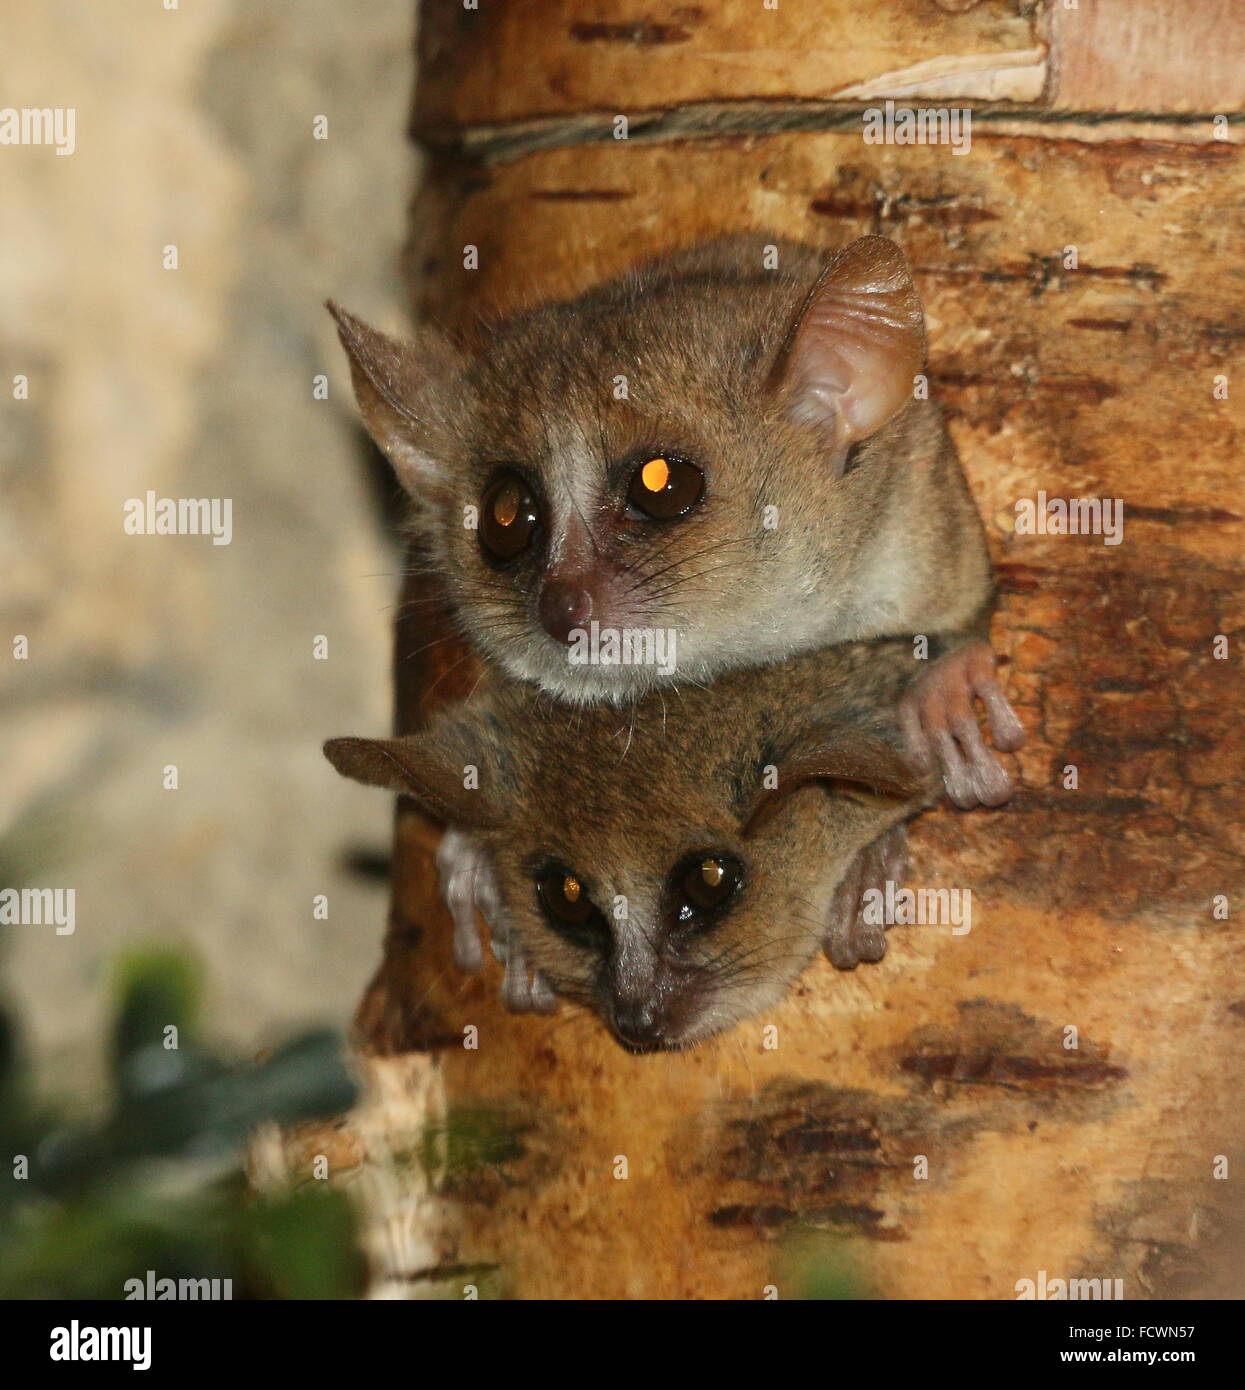 Pair of spunky Madagascan Gray mouse lemurs (Microcebus murinus) peeping out of a tree hole Stock Photo